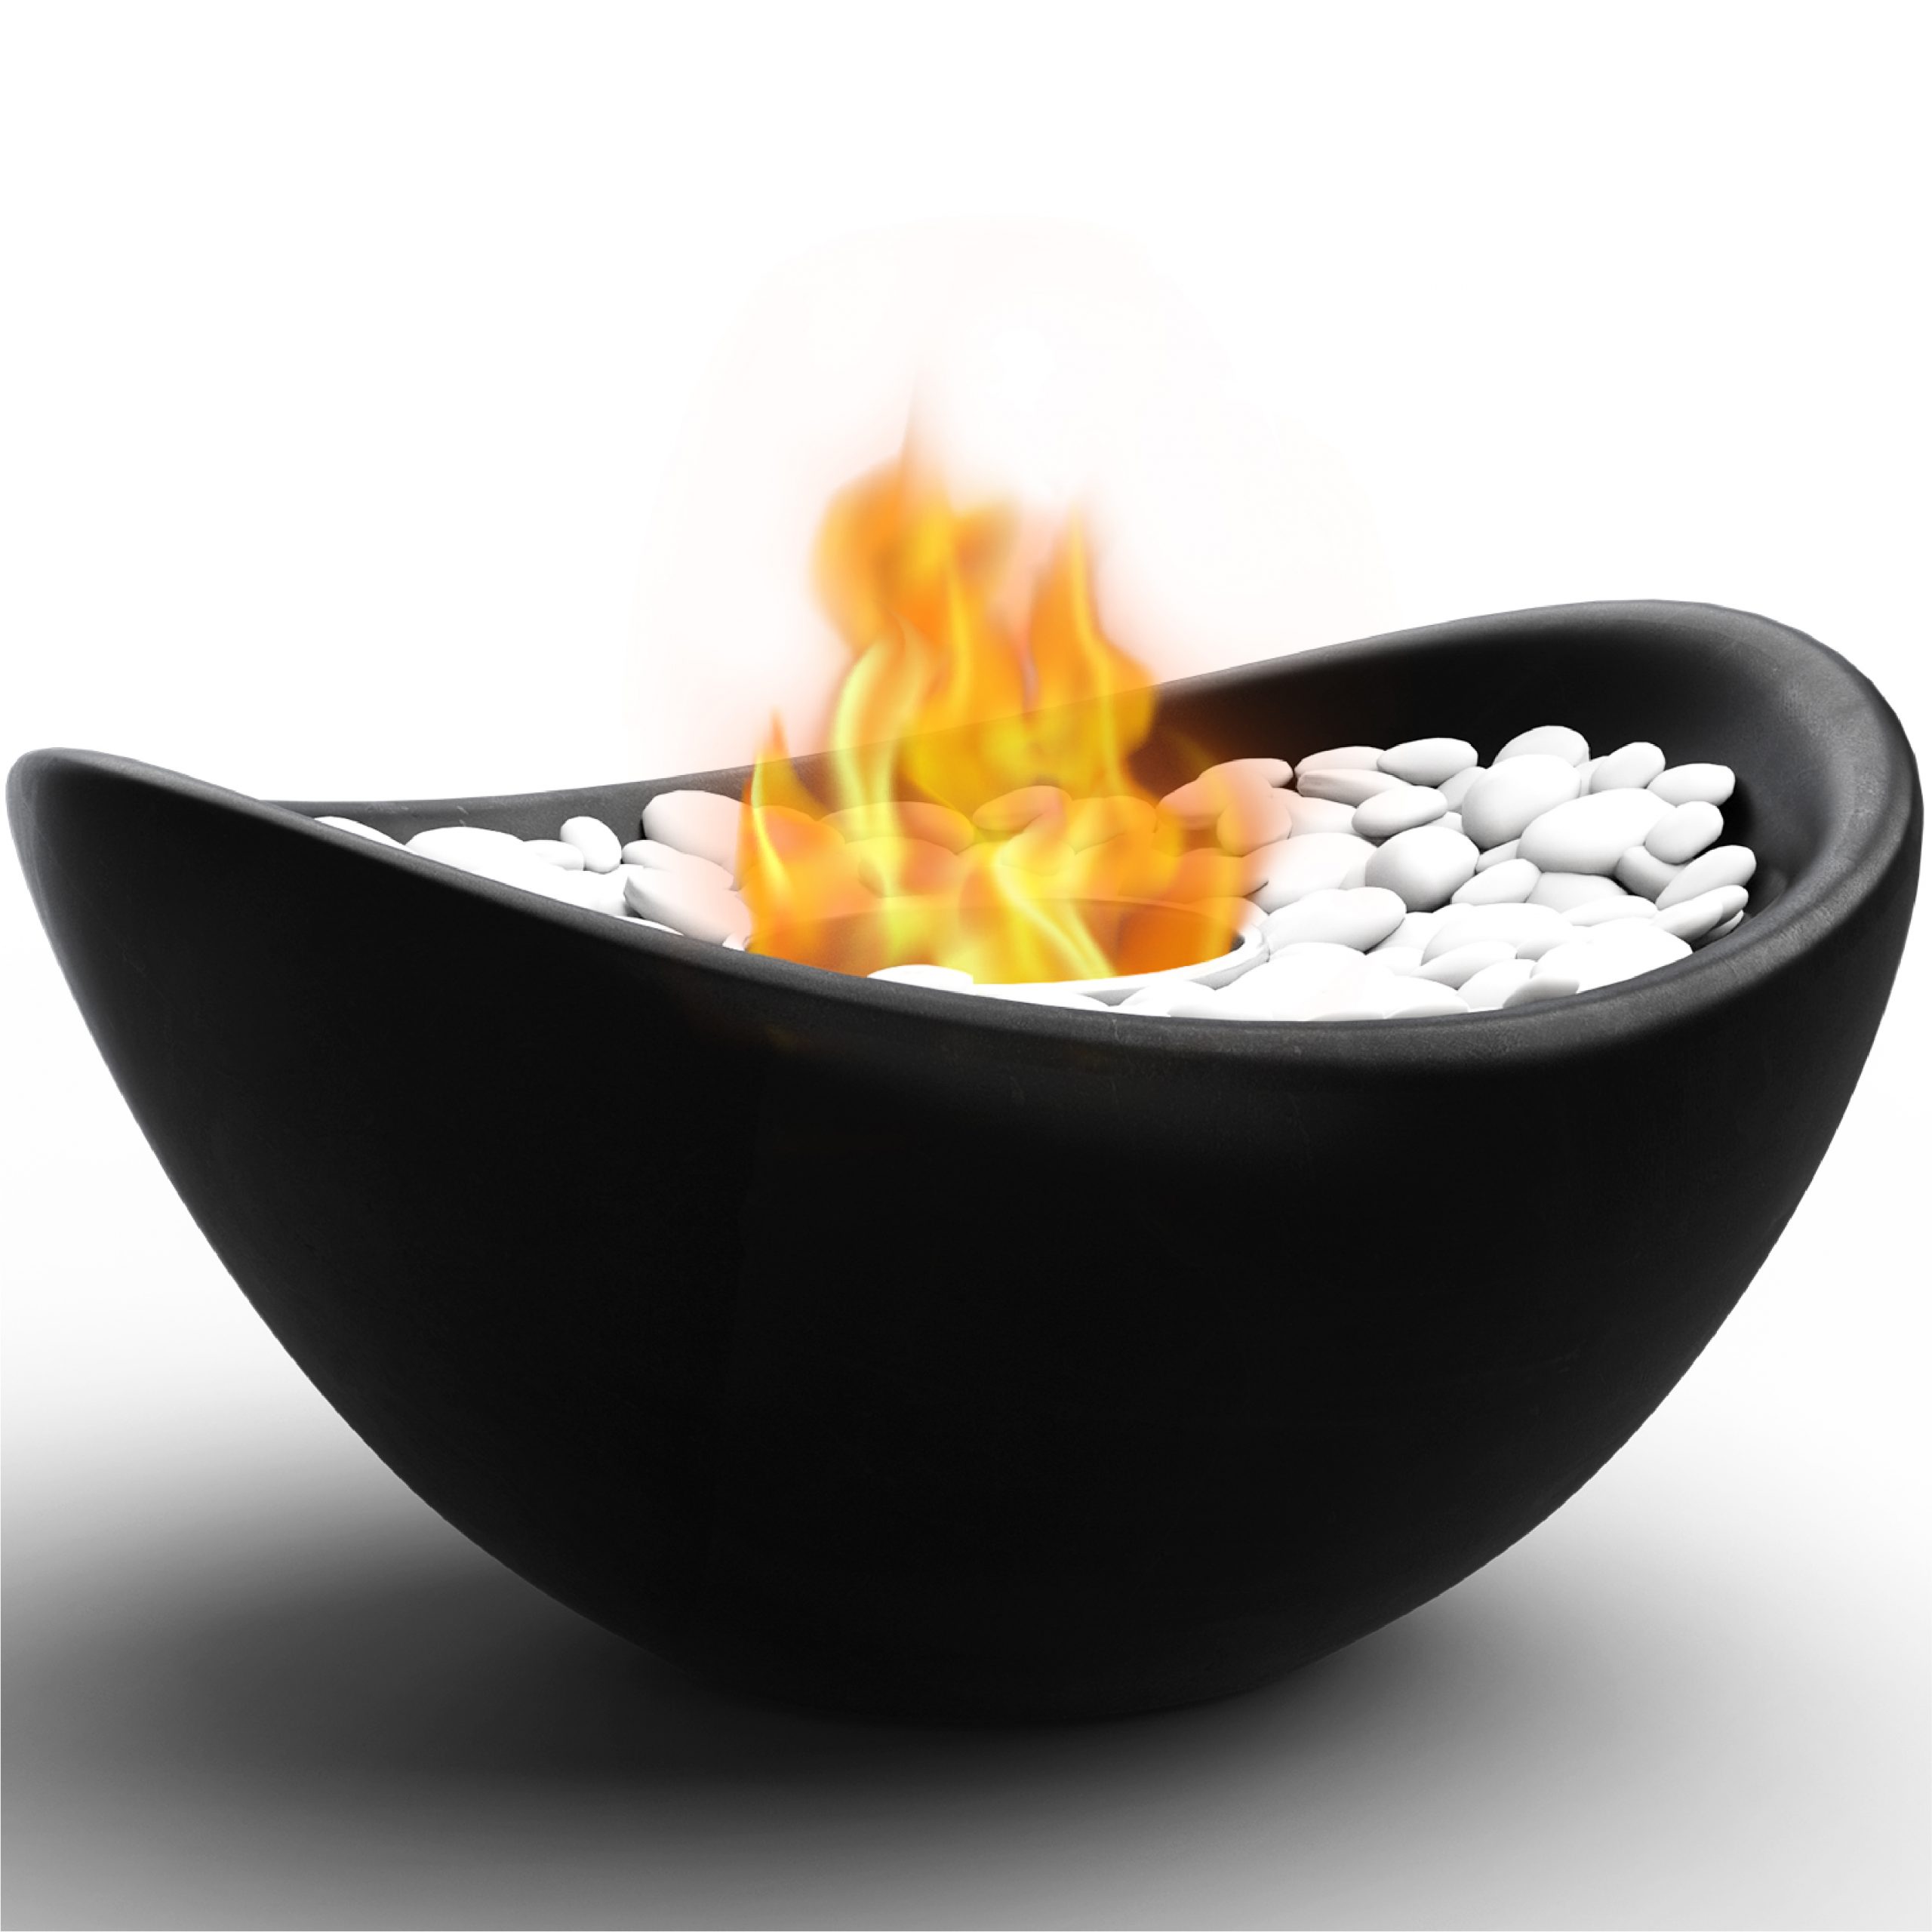 Tabletop Fire Pit for Patio-Use Gel Fuel Cans,Bioethanol/Isopropyl